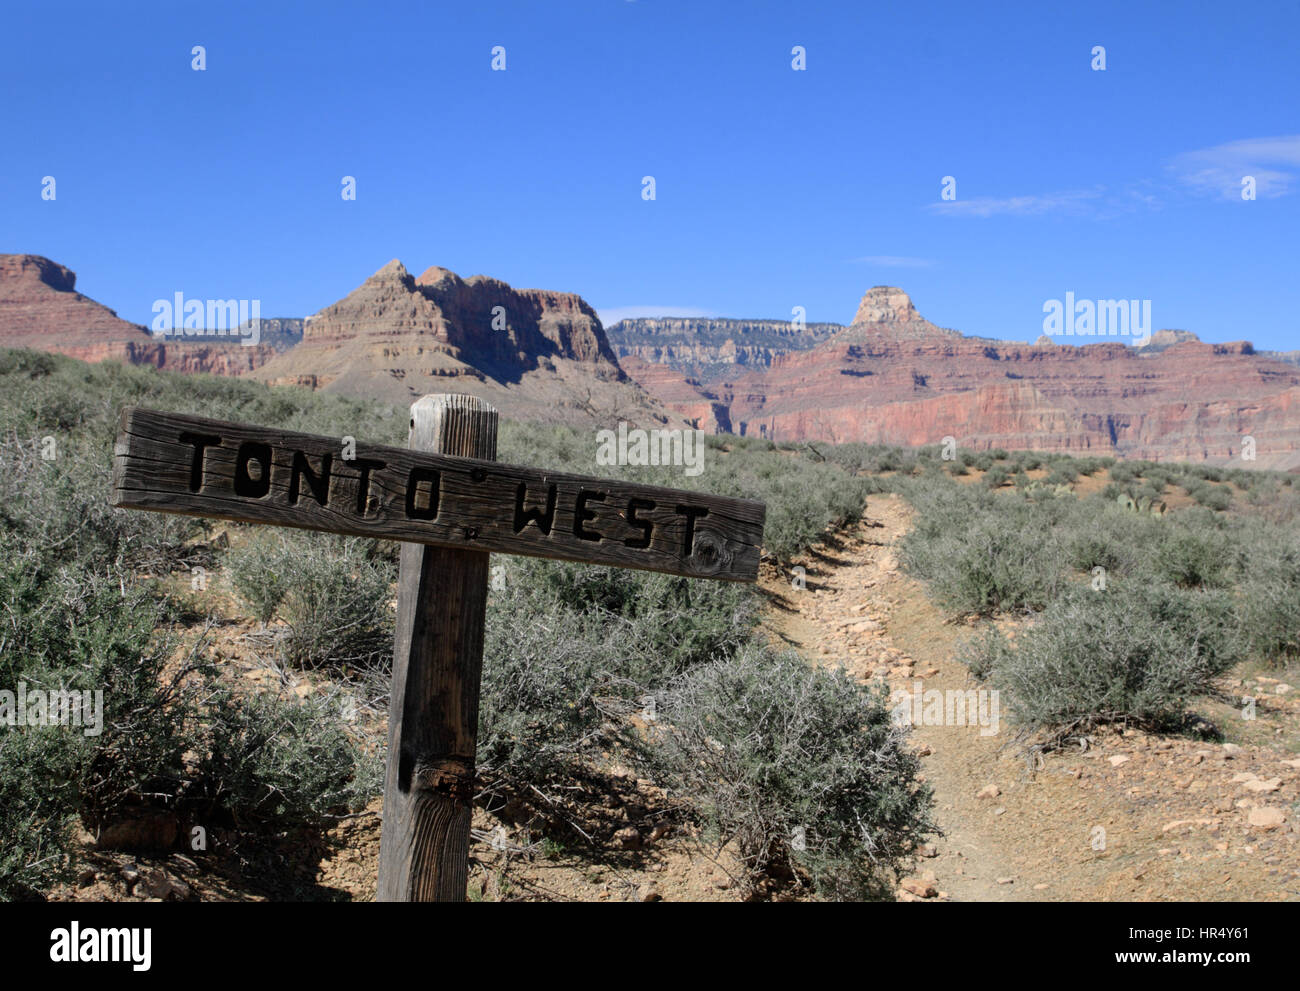 Tonto West Trail and trail sign in the Grand Canyon Stock Photo